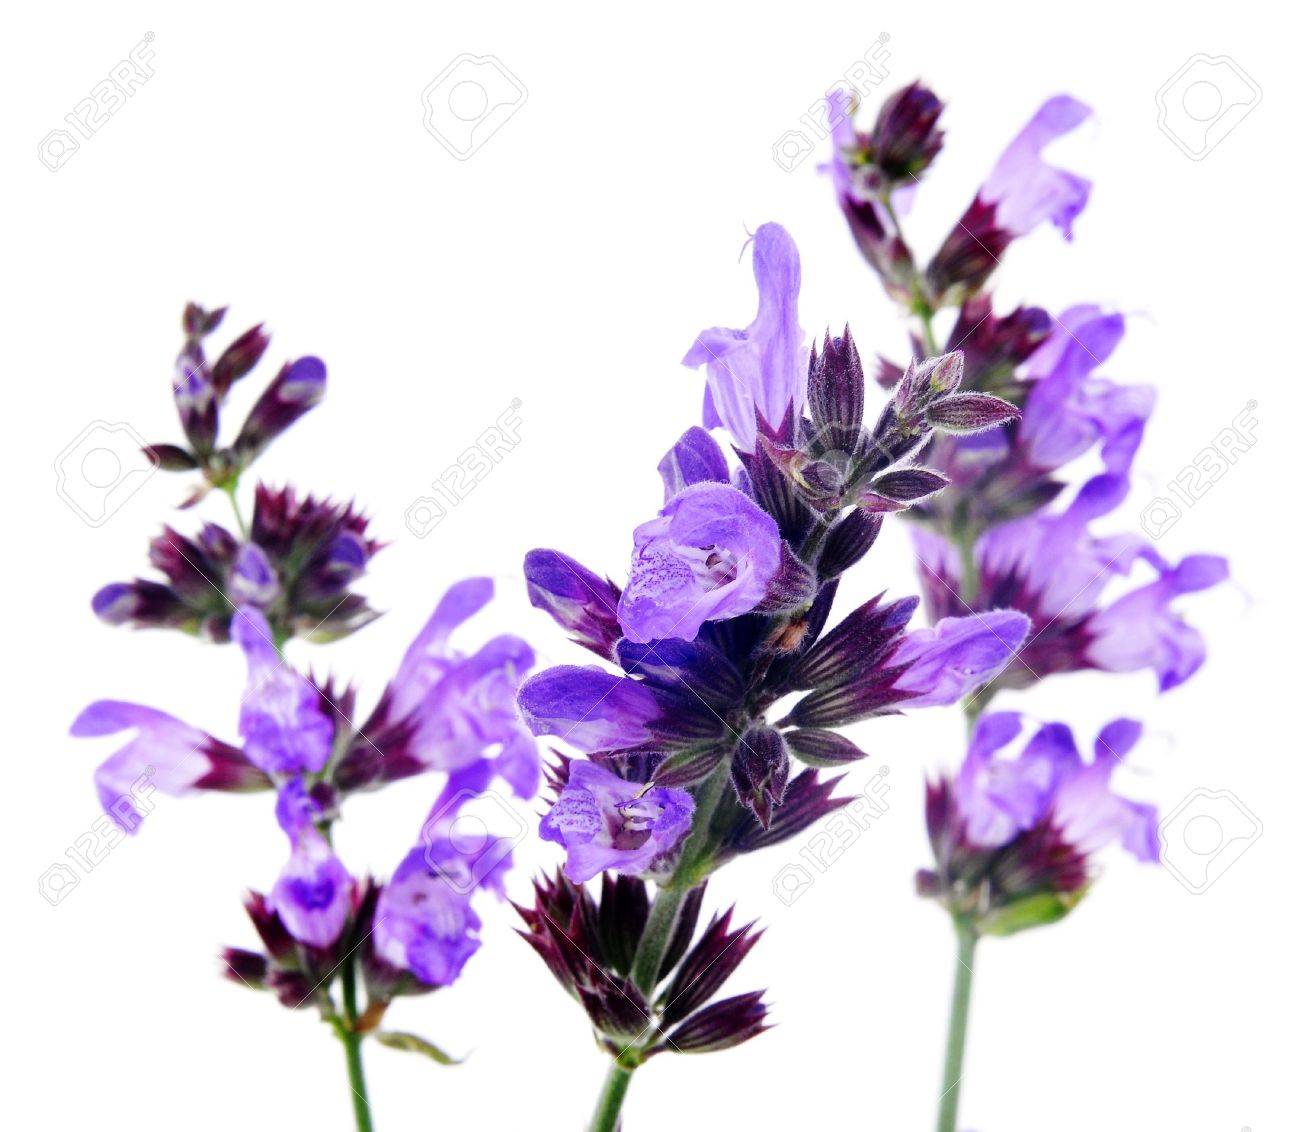 Salvia Flowers On A White Background Stock Photo Picture And